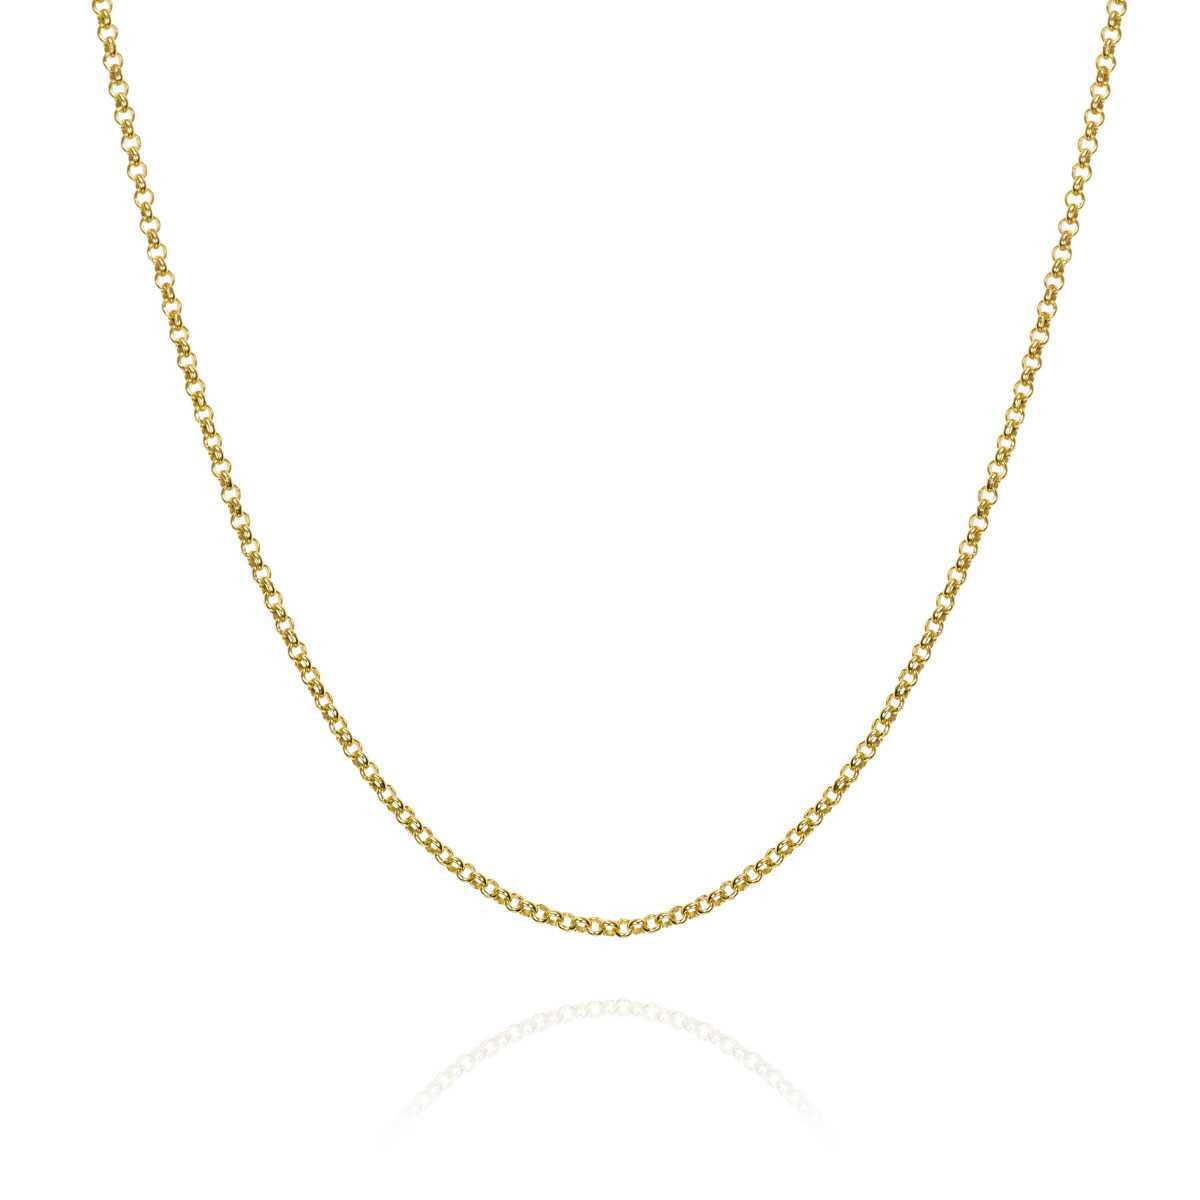 Chain in Silver. 18 k Gold